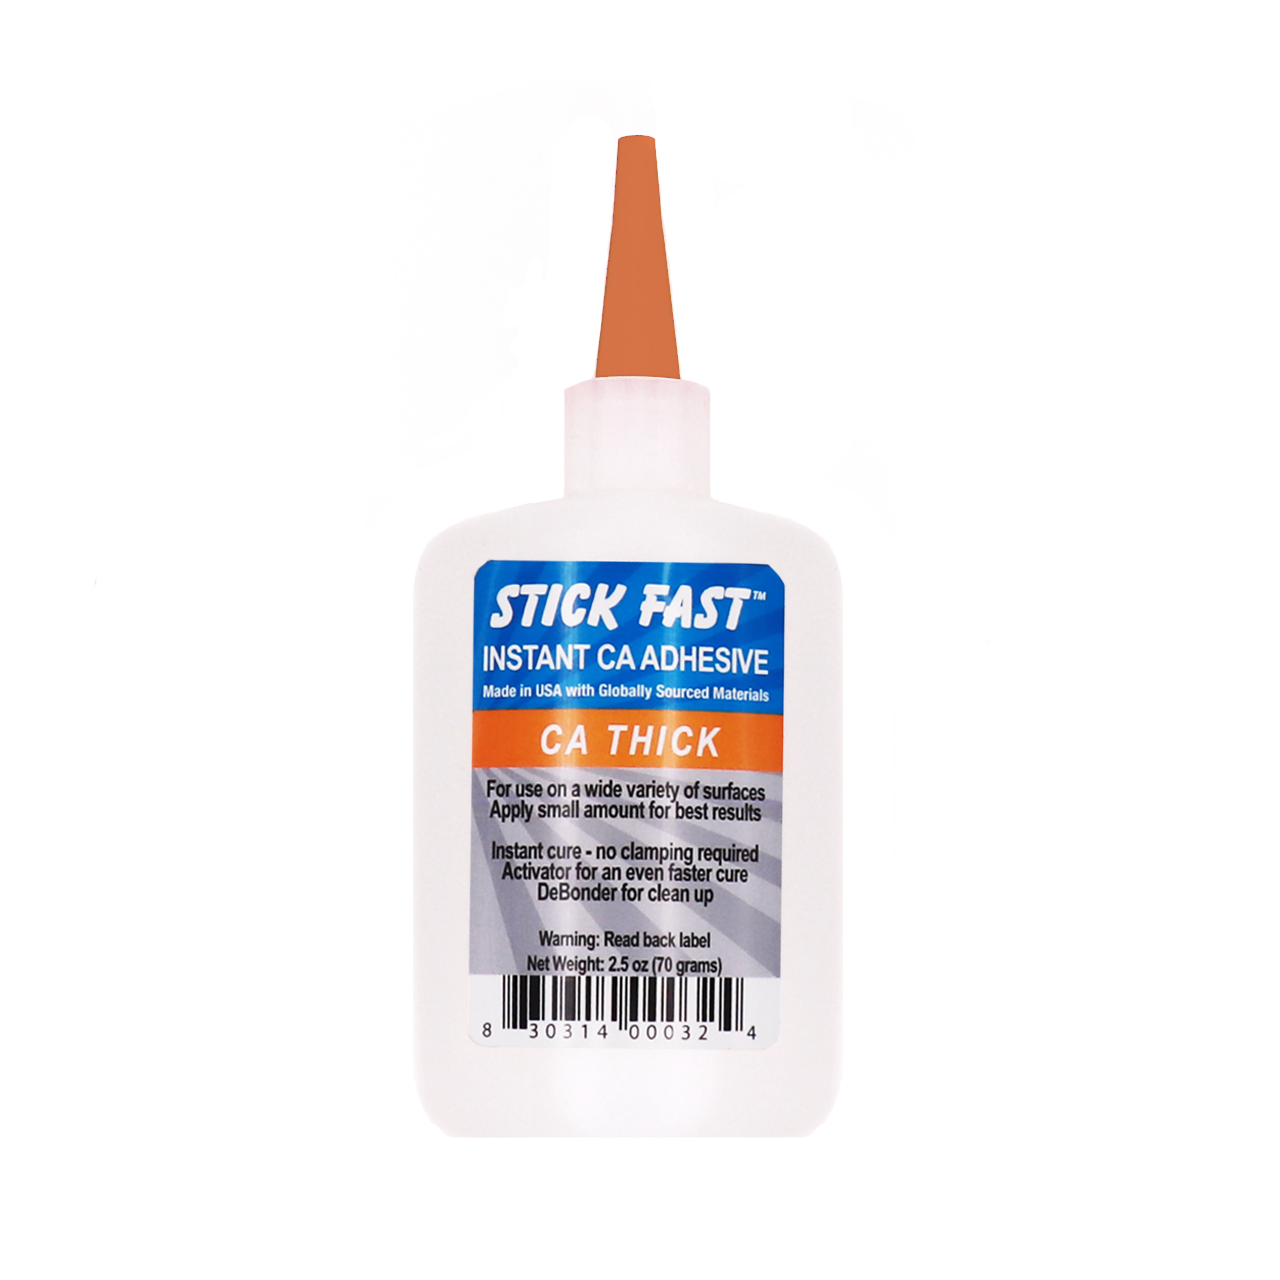 Stick Fast Instant CA Adhesive Glue, Thick Viscosity, 2.5oz Bottle